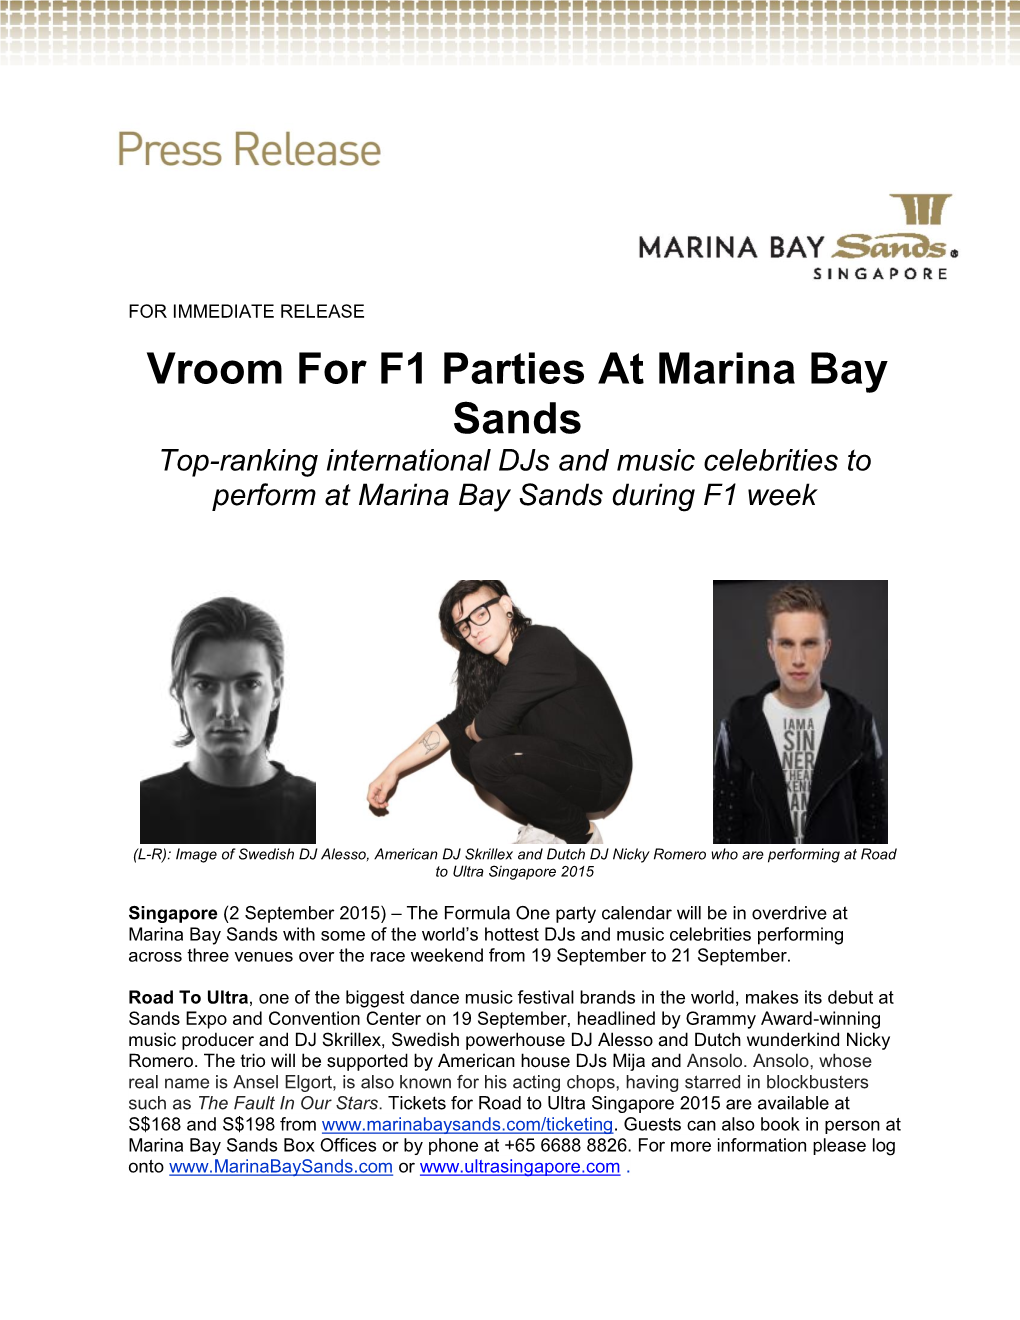 Vroom for F1 Parties at Marina Bay Sands Top-Ranking International Djs and Music Celebrities to Perform at Marina Bay Sands During F1 Week